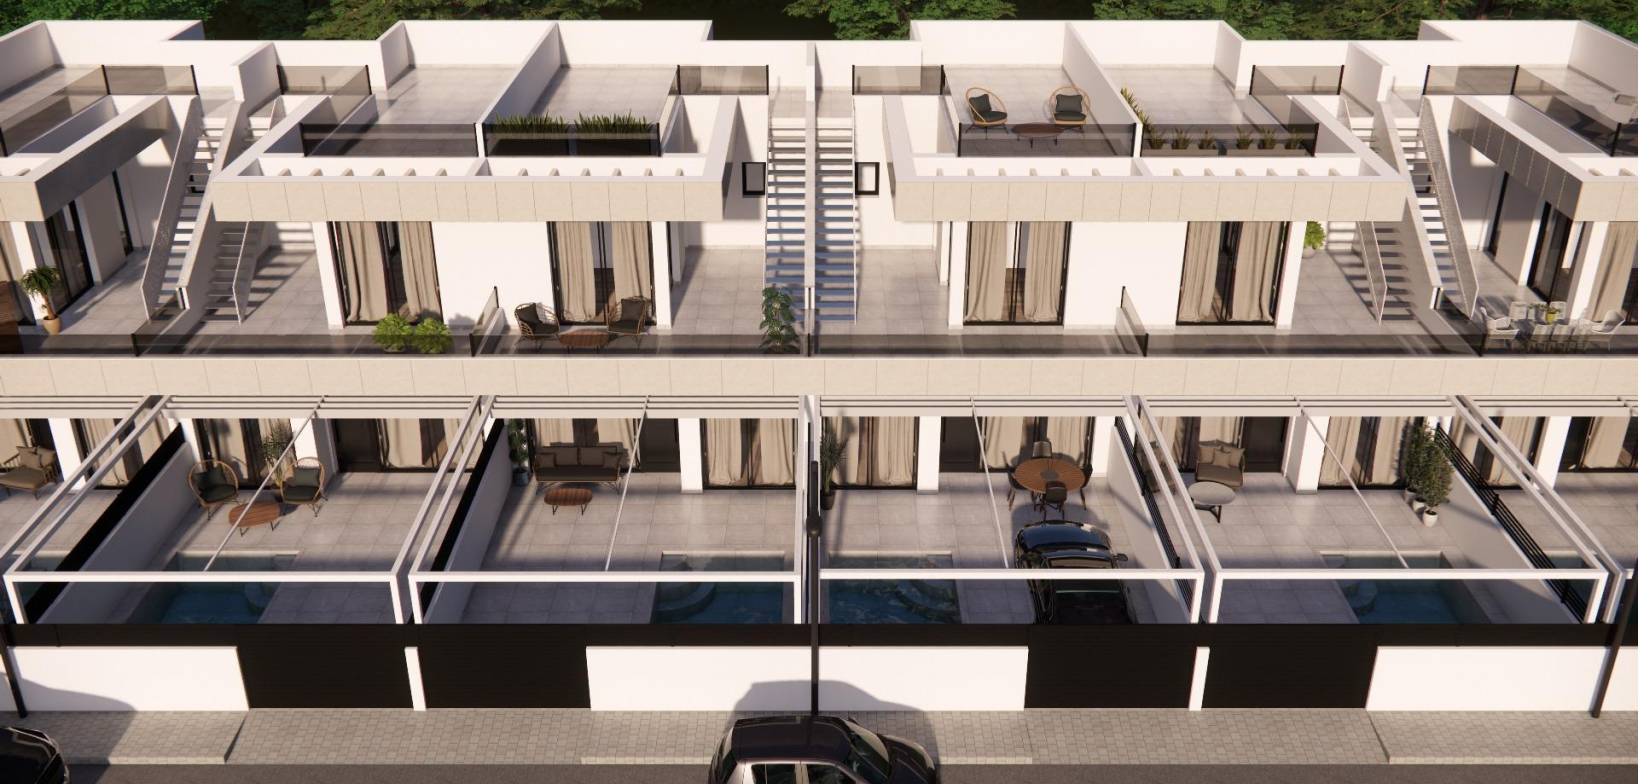 New Build - Town House - Rojales - Costa Blanca South